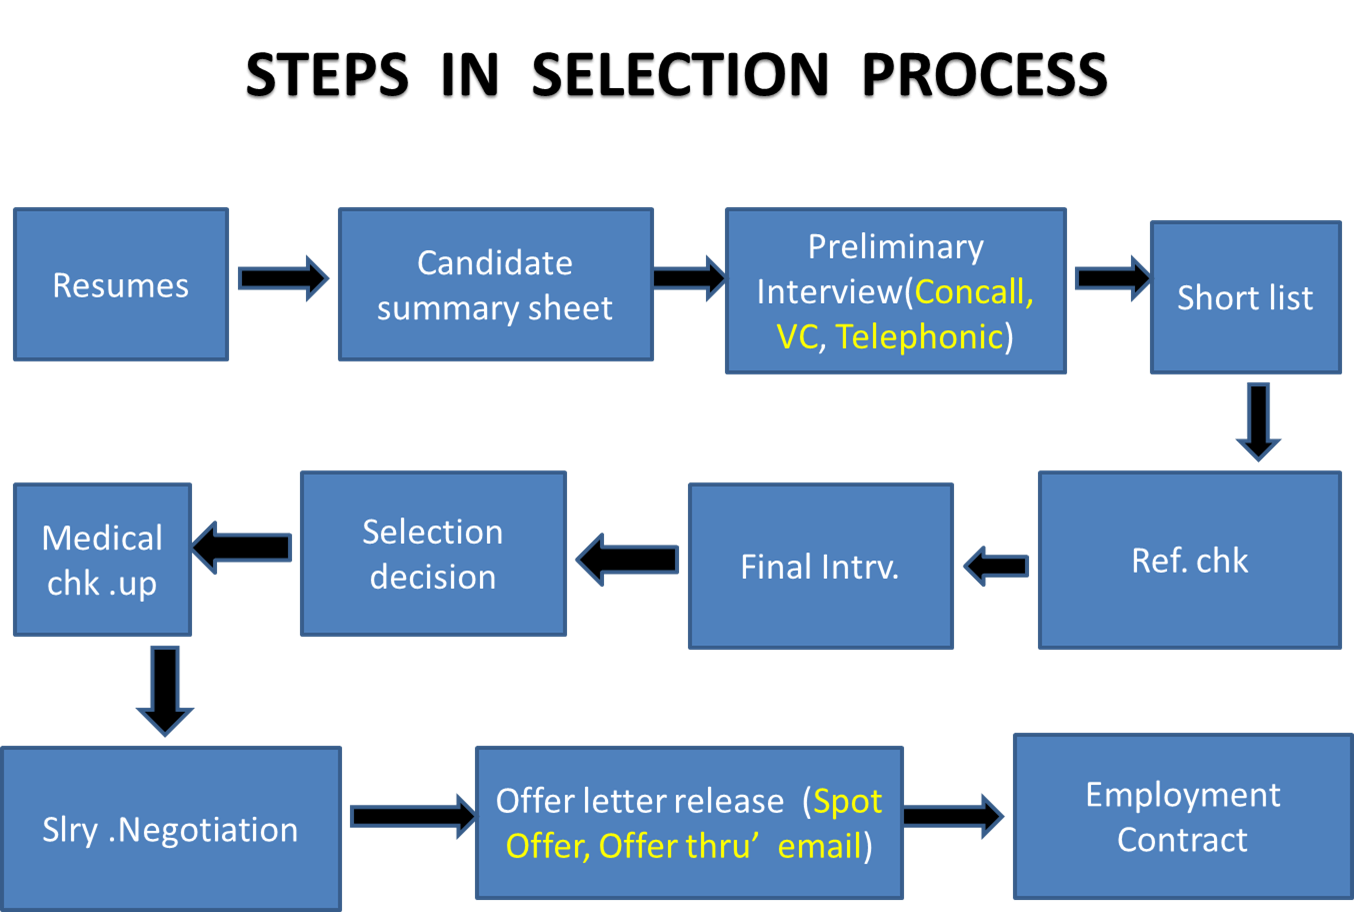 Process of Selection